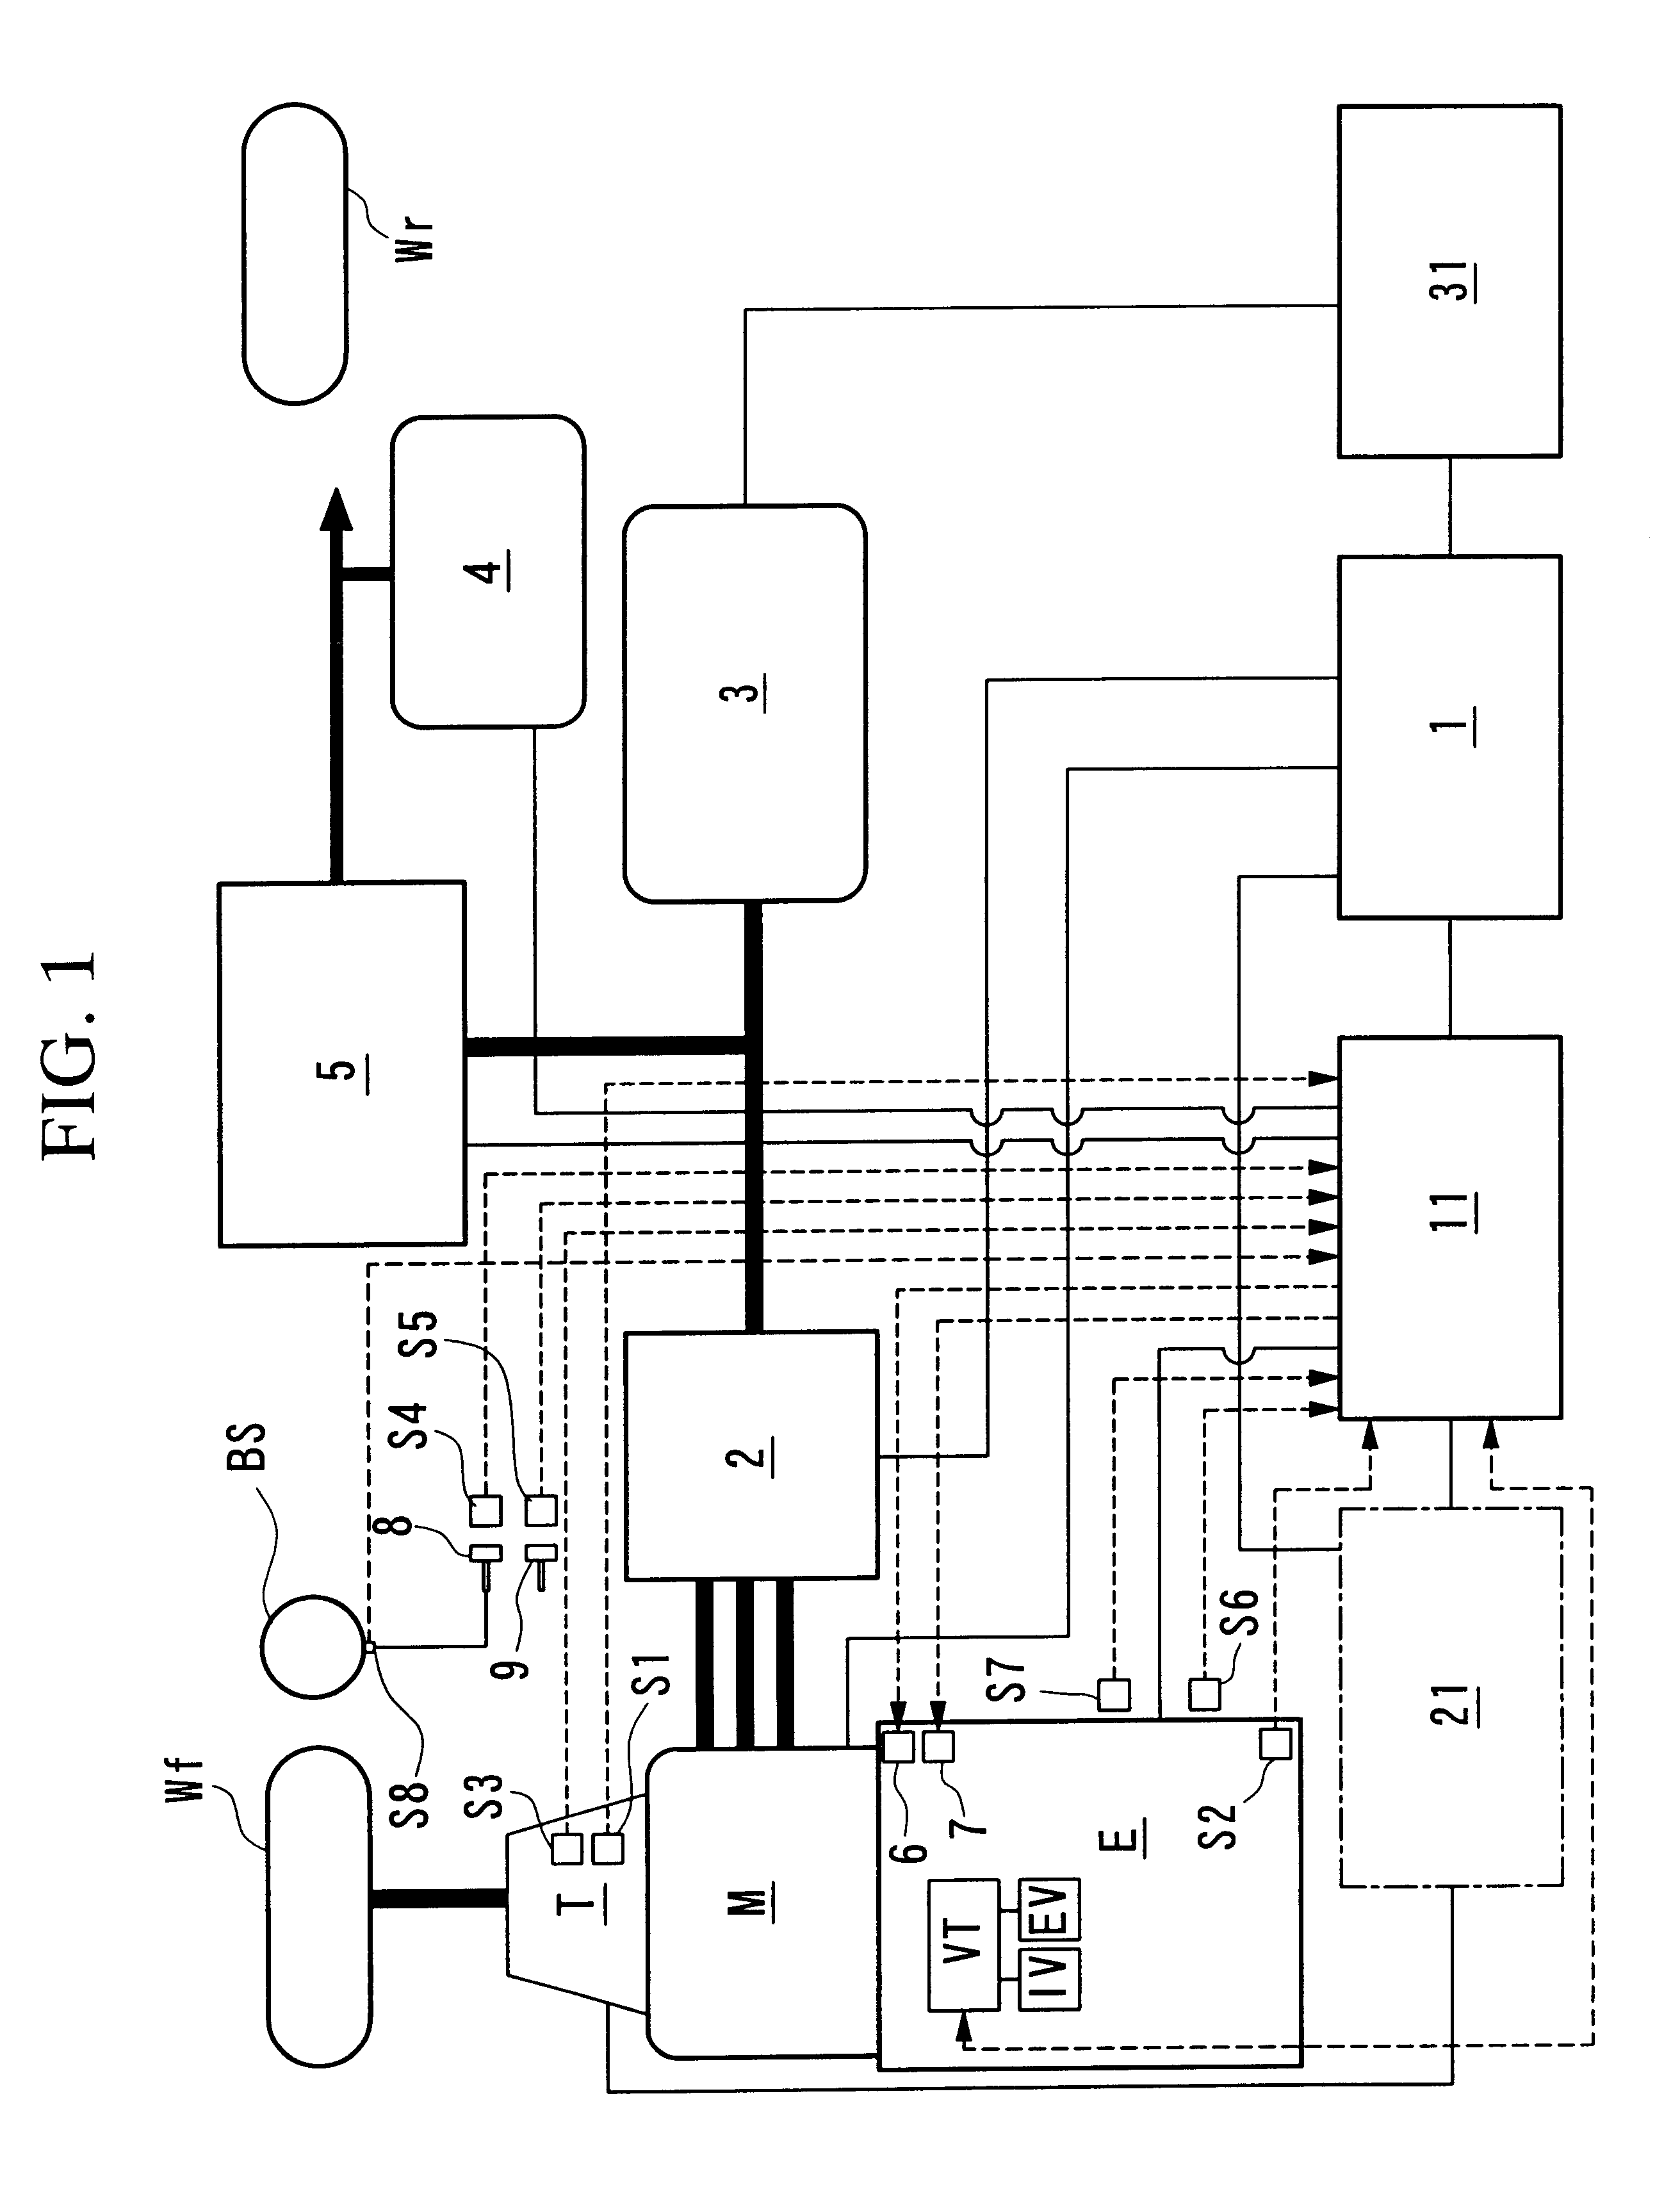 Control apparatus for hybrid vehicle